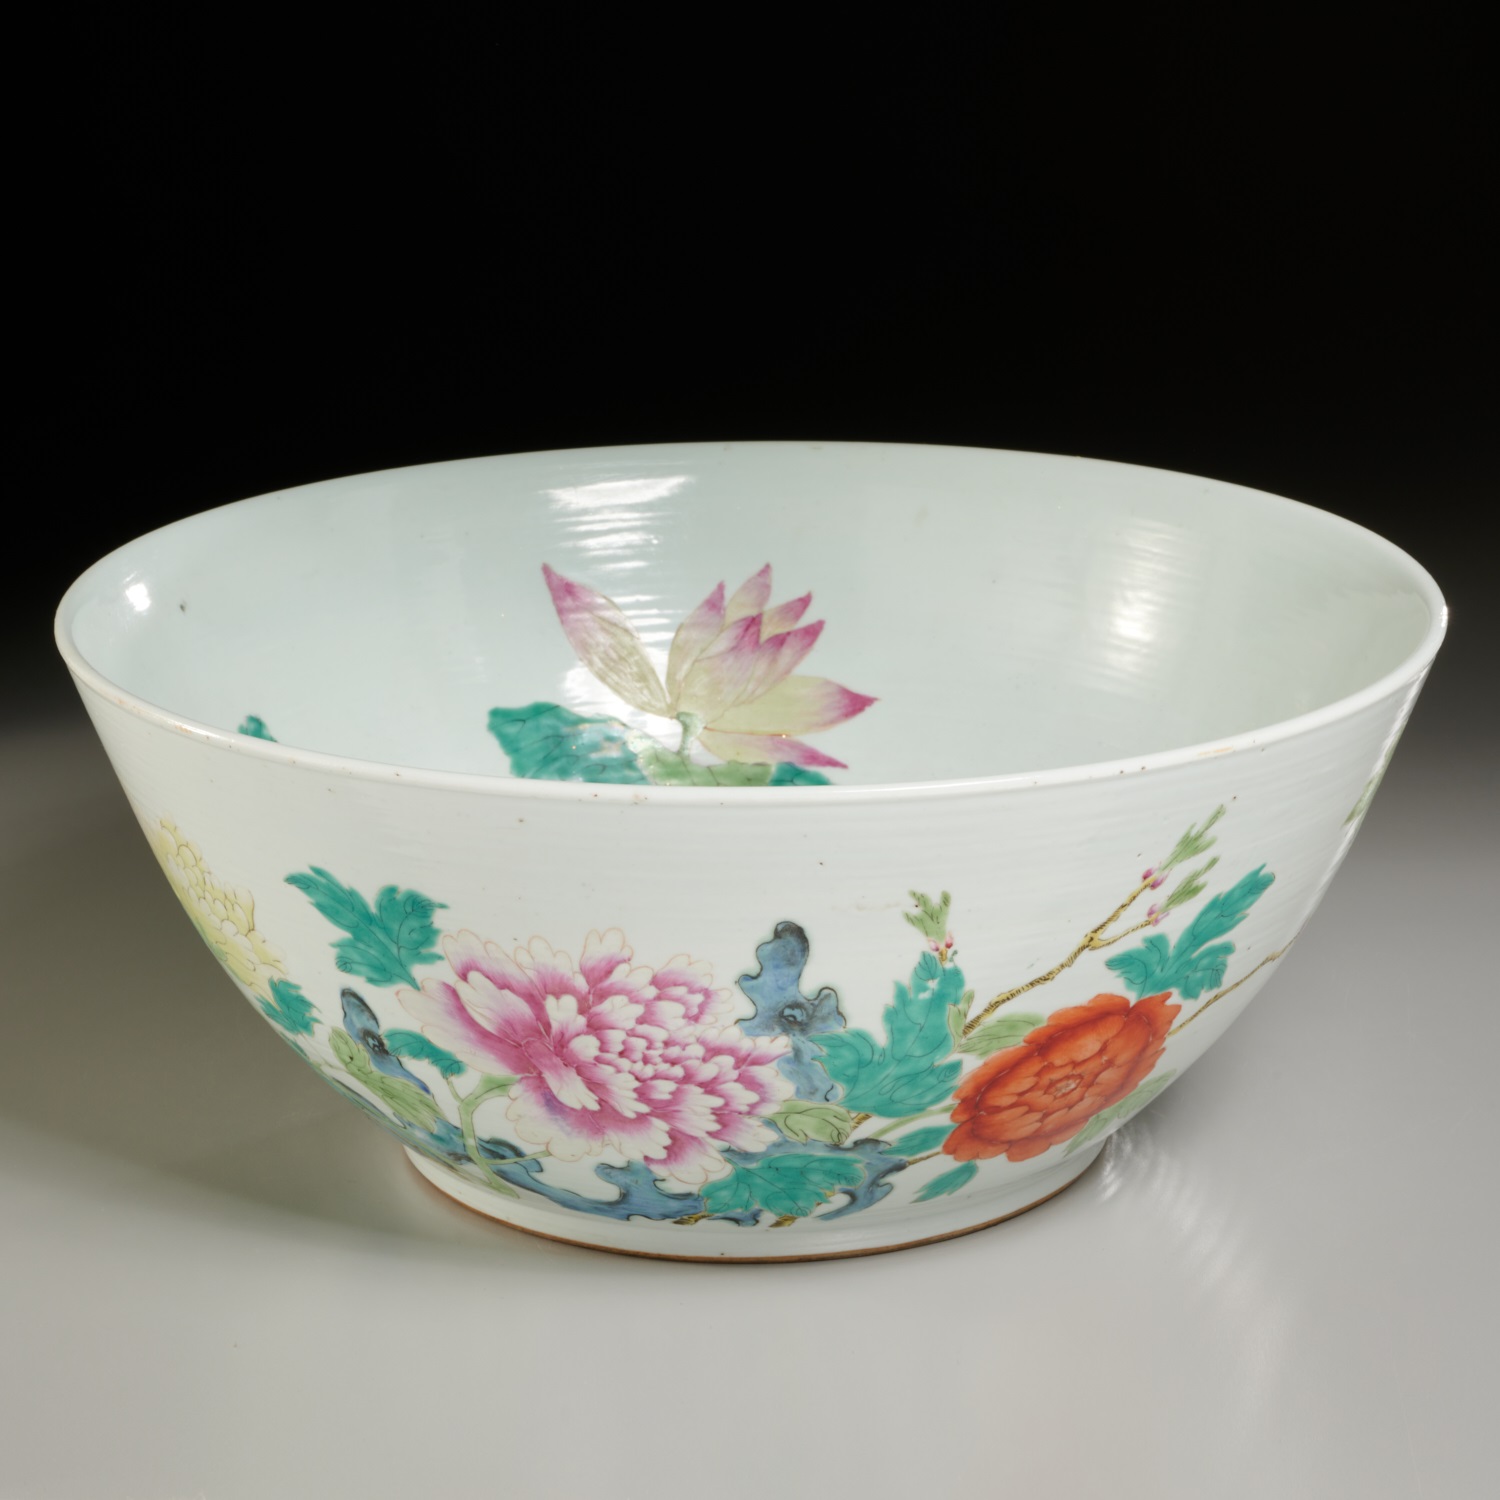 LARGE CHINESE PORCELAIN LOTUS DECORATED 2a5d4e